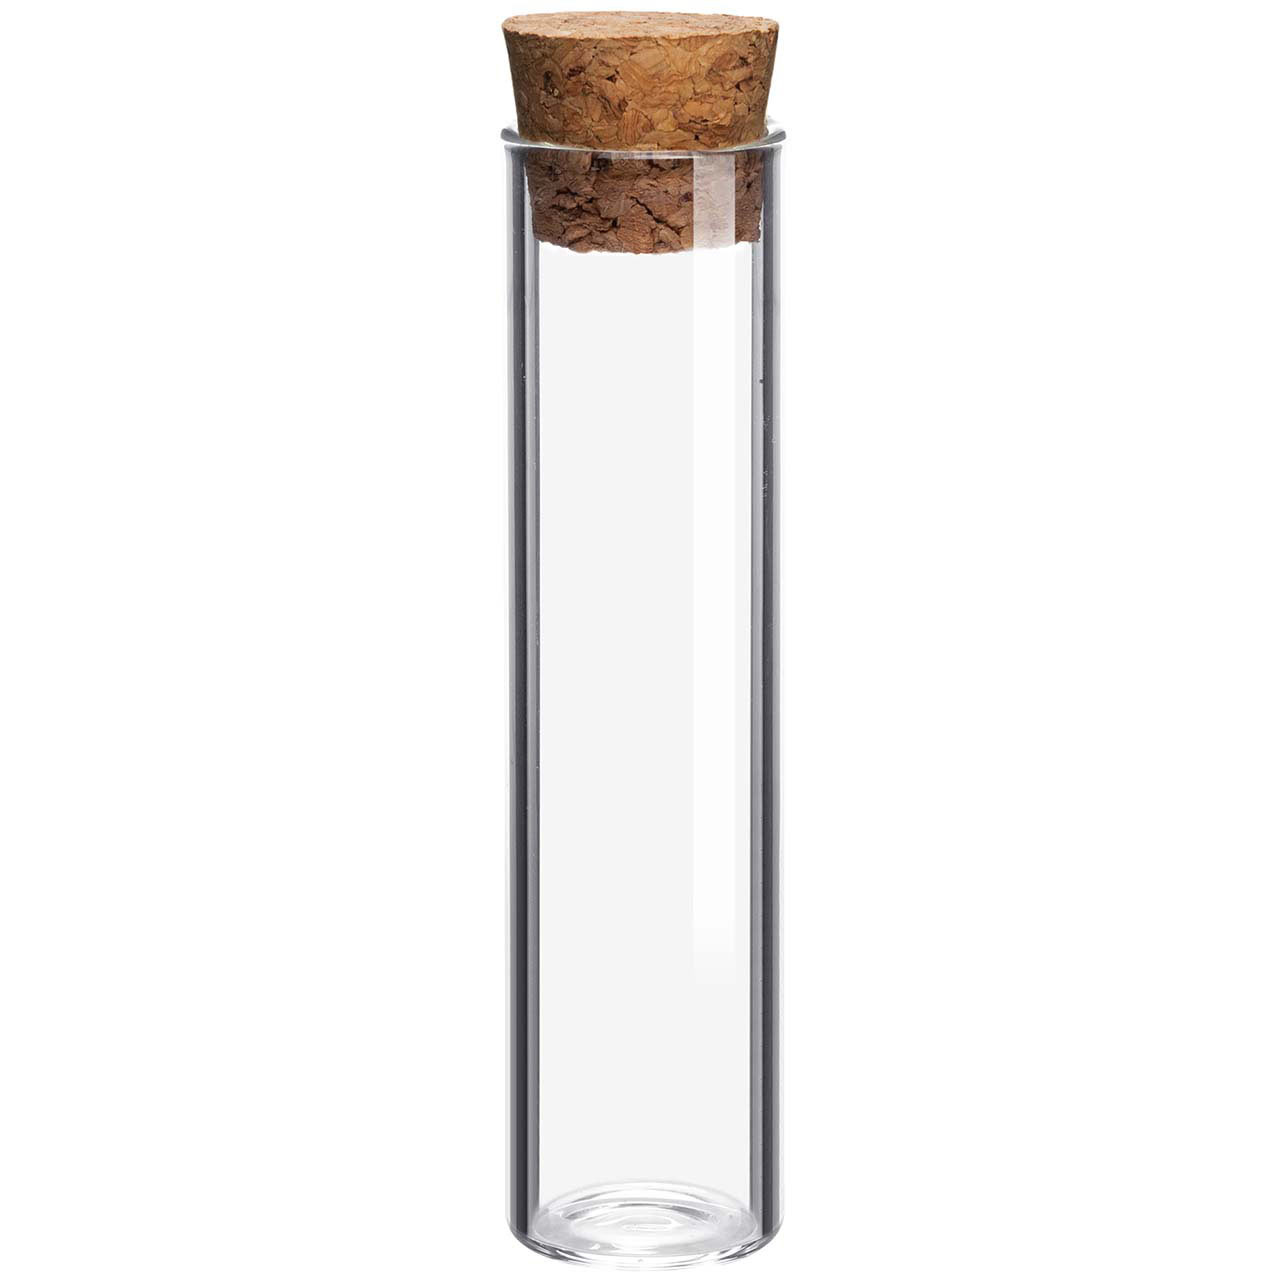 https://cdn11.bigcommerce.com/s-uzavep2g8k/images/stencil/1280x1280/products/144/3349/7233-C-Glass-Tube-With-Cork__24216.1703804793.jpg?c=1